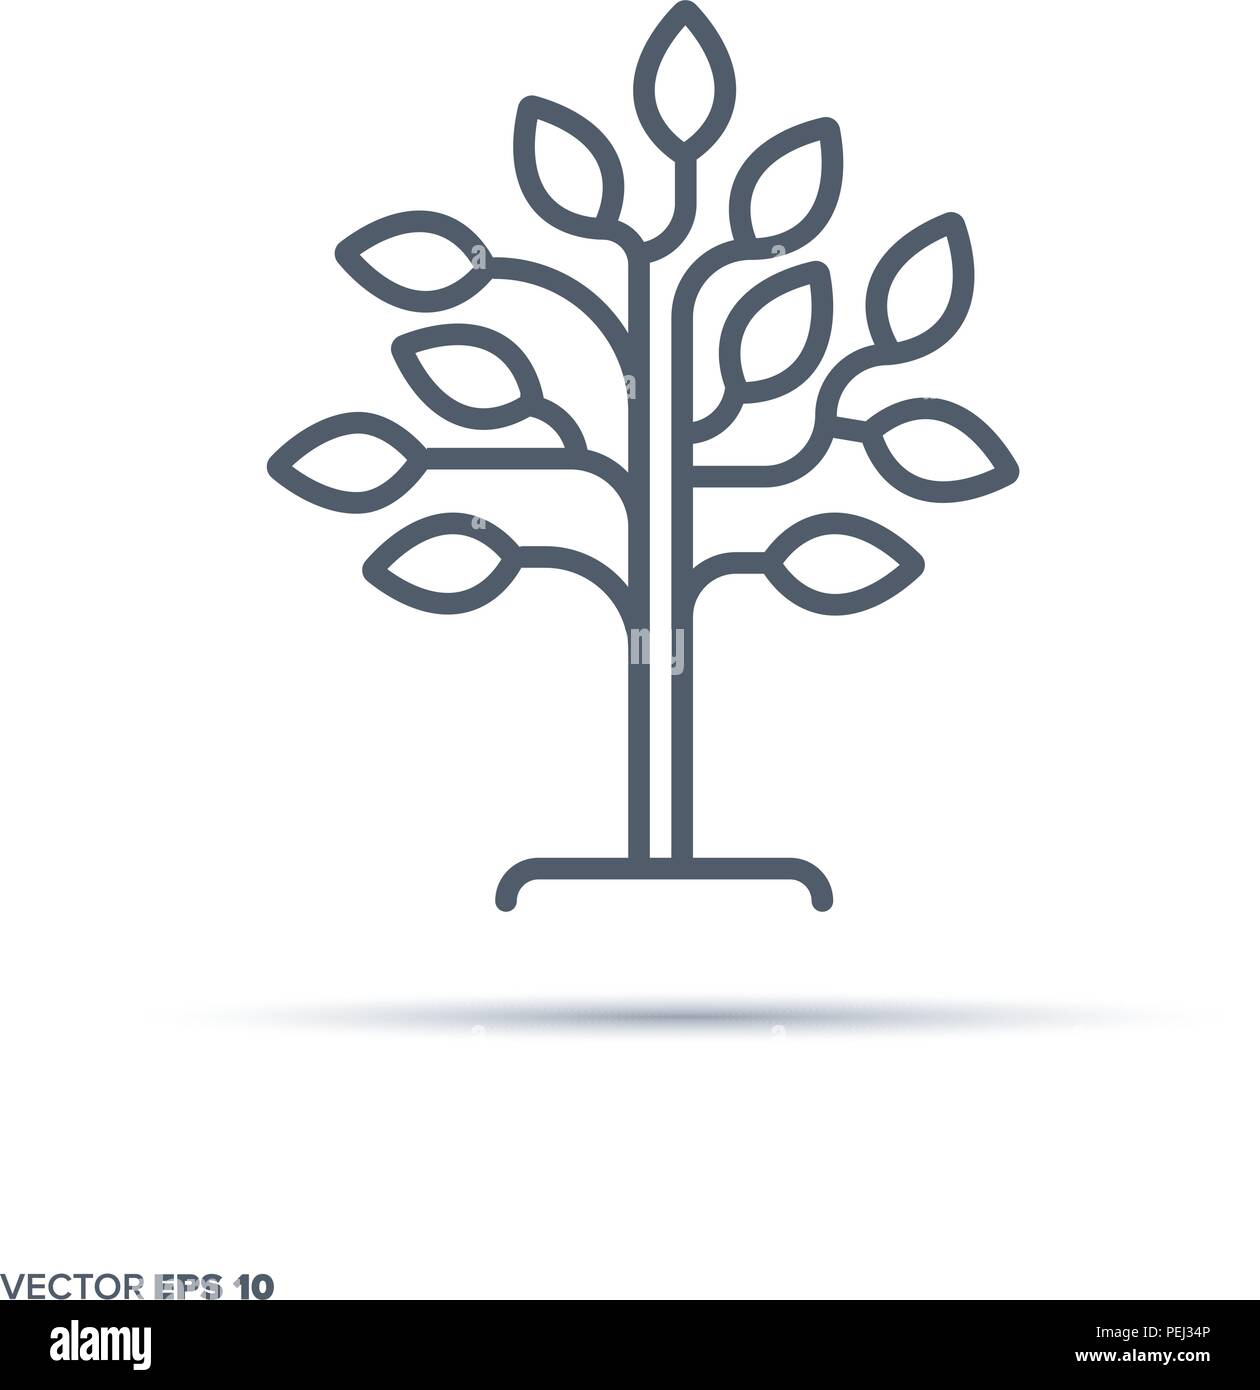 Treeline Cut Out Stock Images & Pictures - Alamy